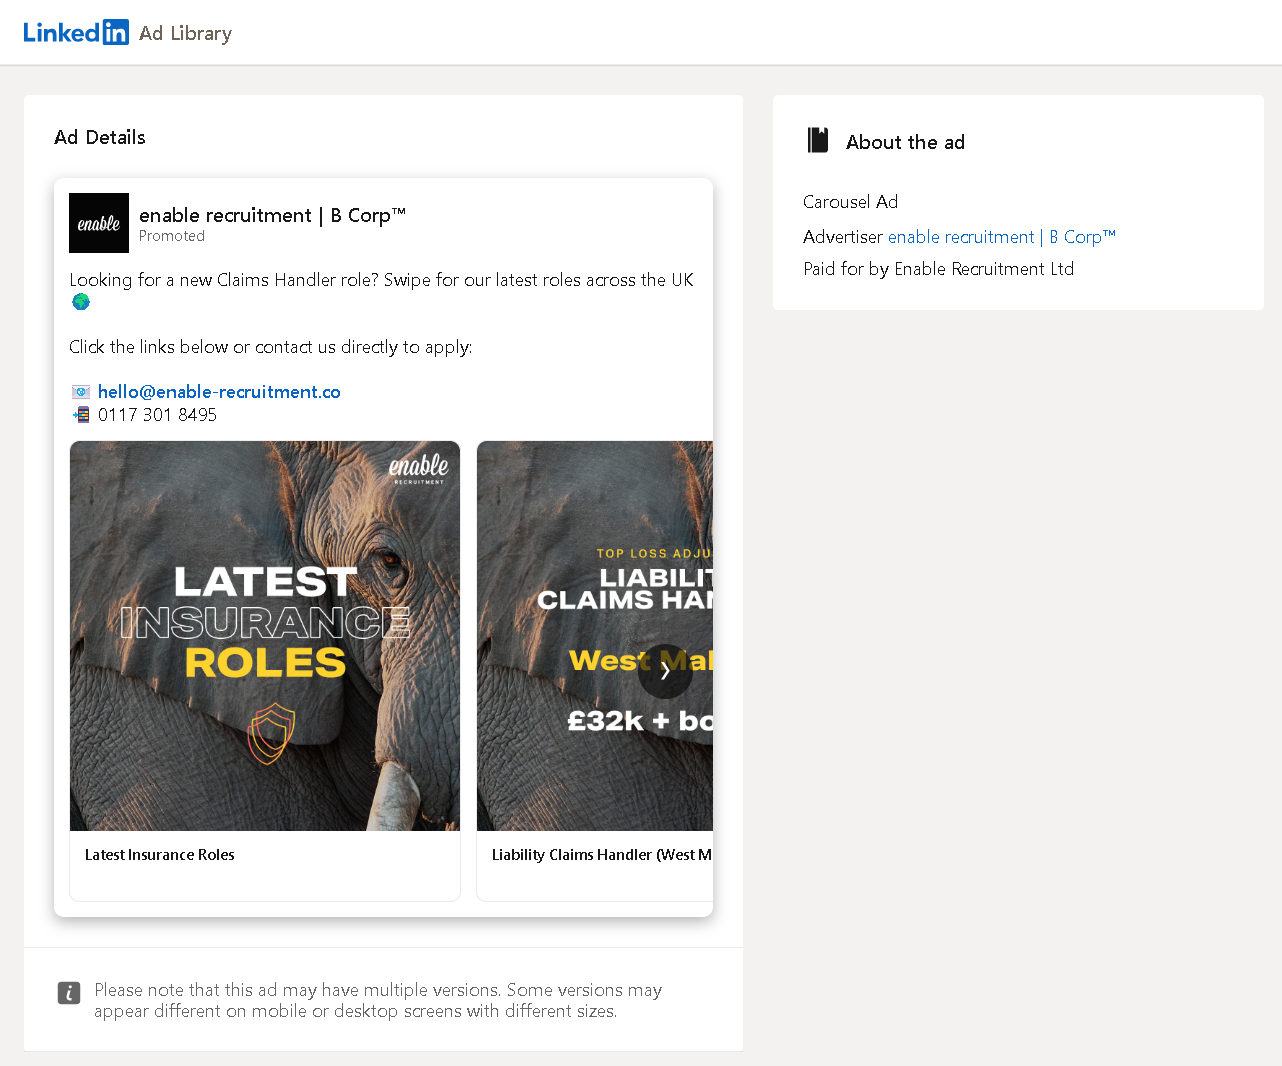 LinkedIn Carousel Ad Examples: Enable Recruitment